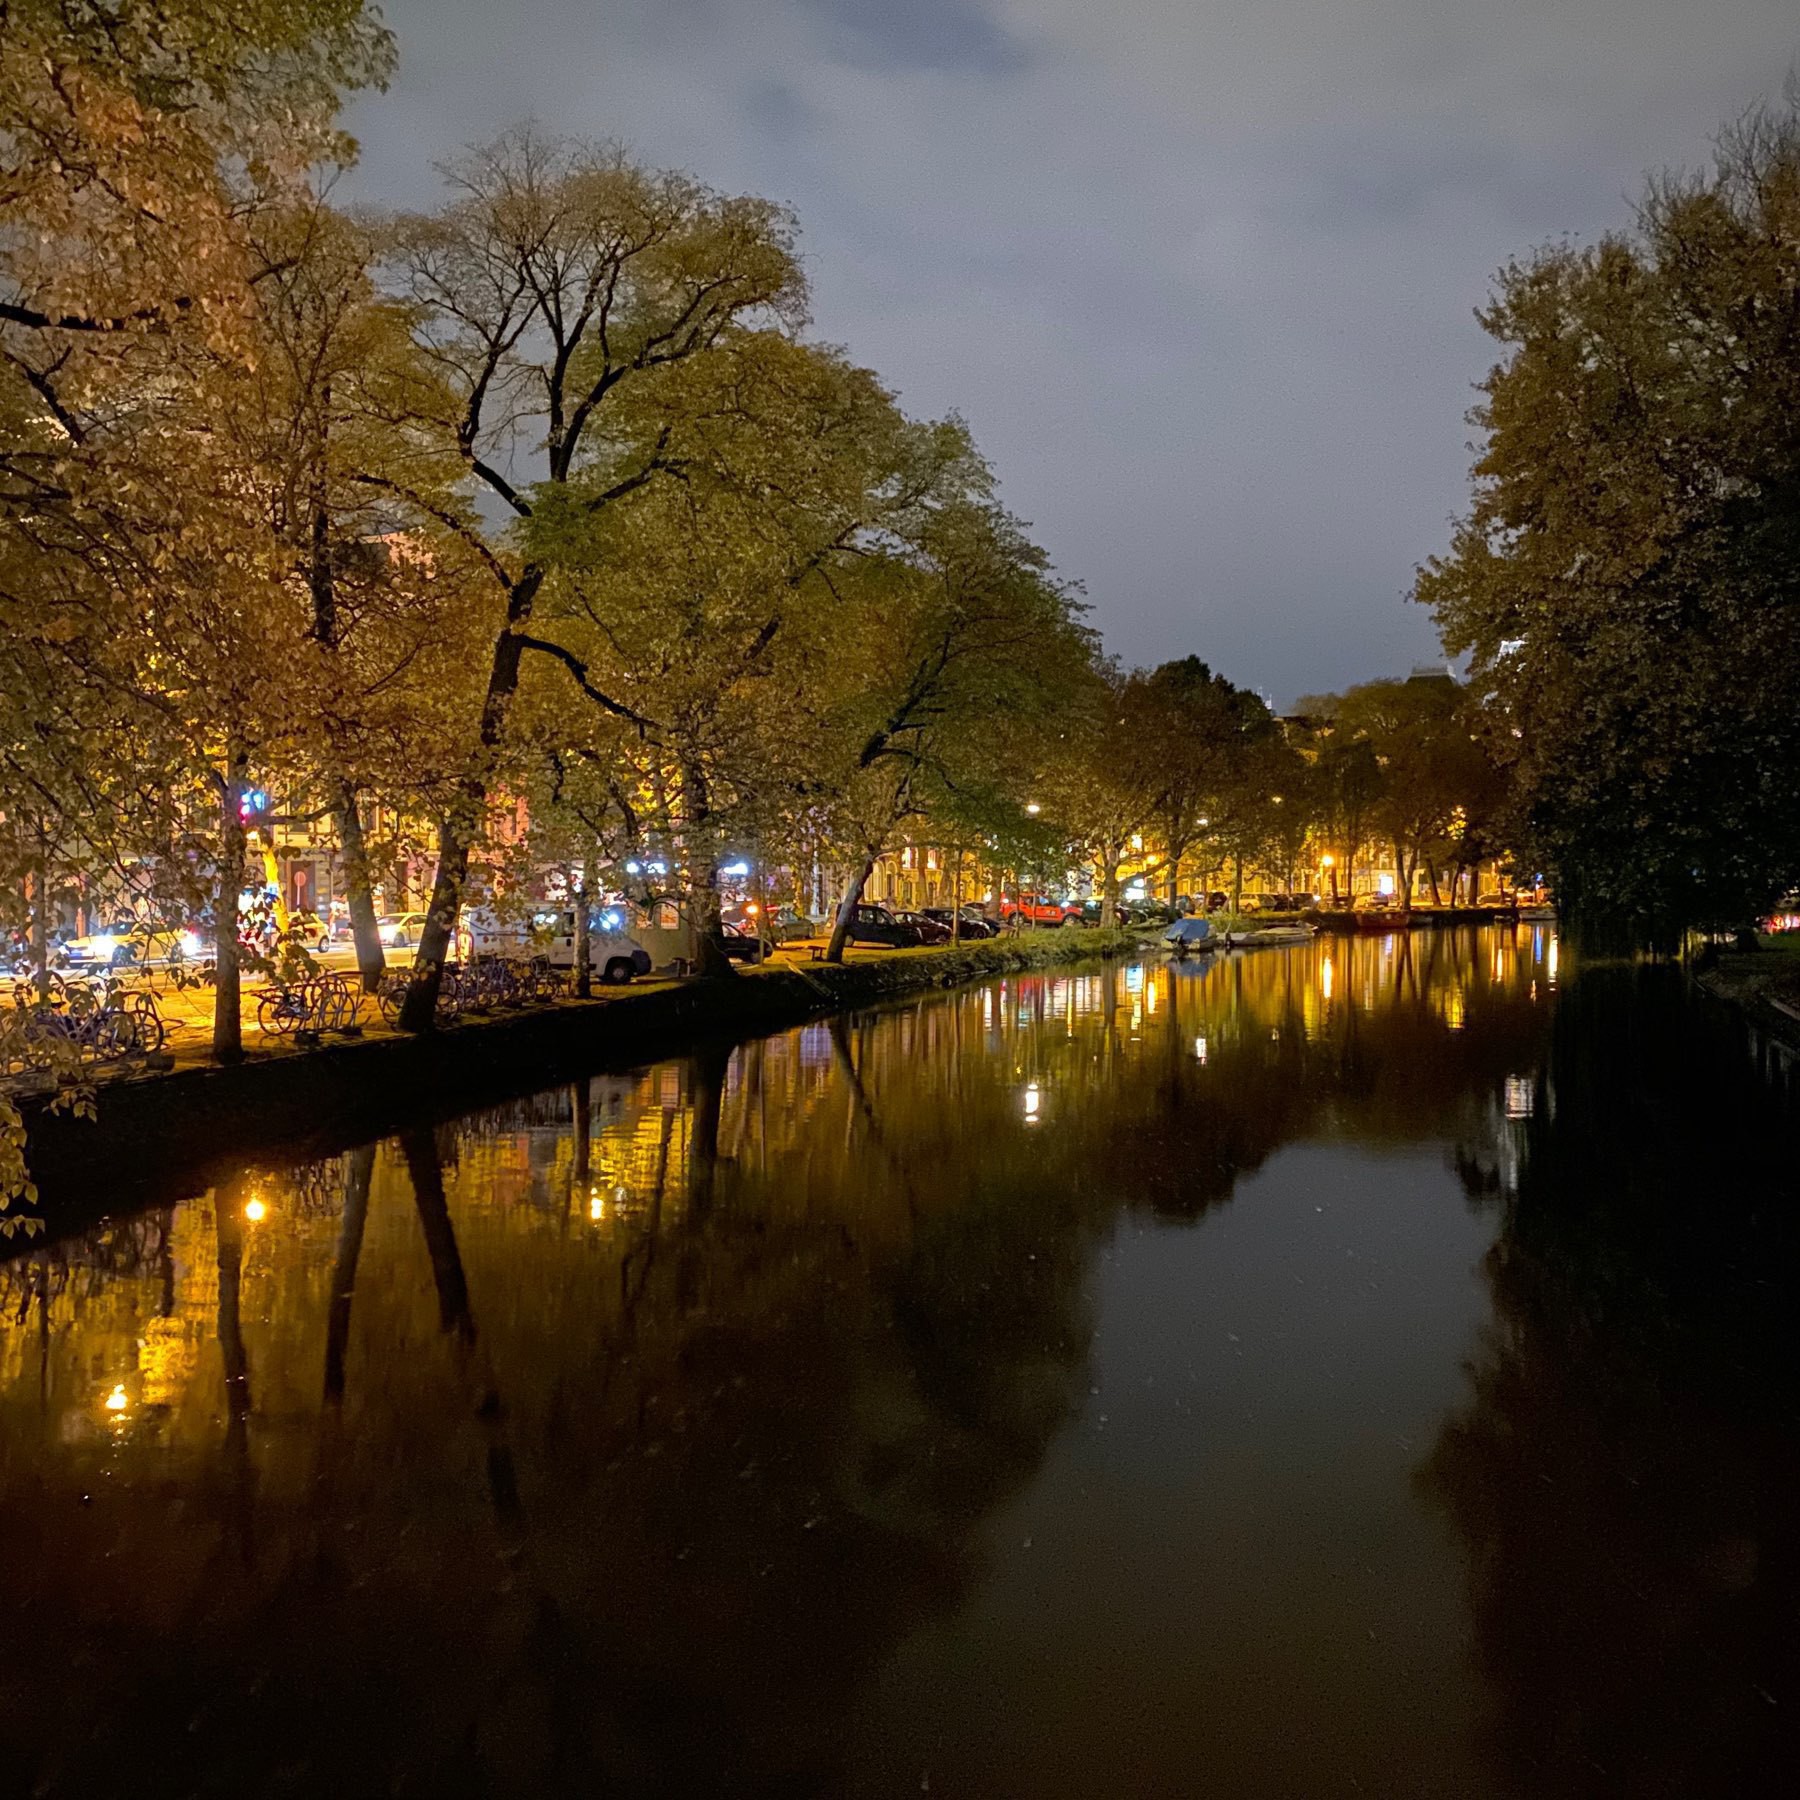 Night mode picture of an Amsterdam canal with tree canopy.